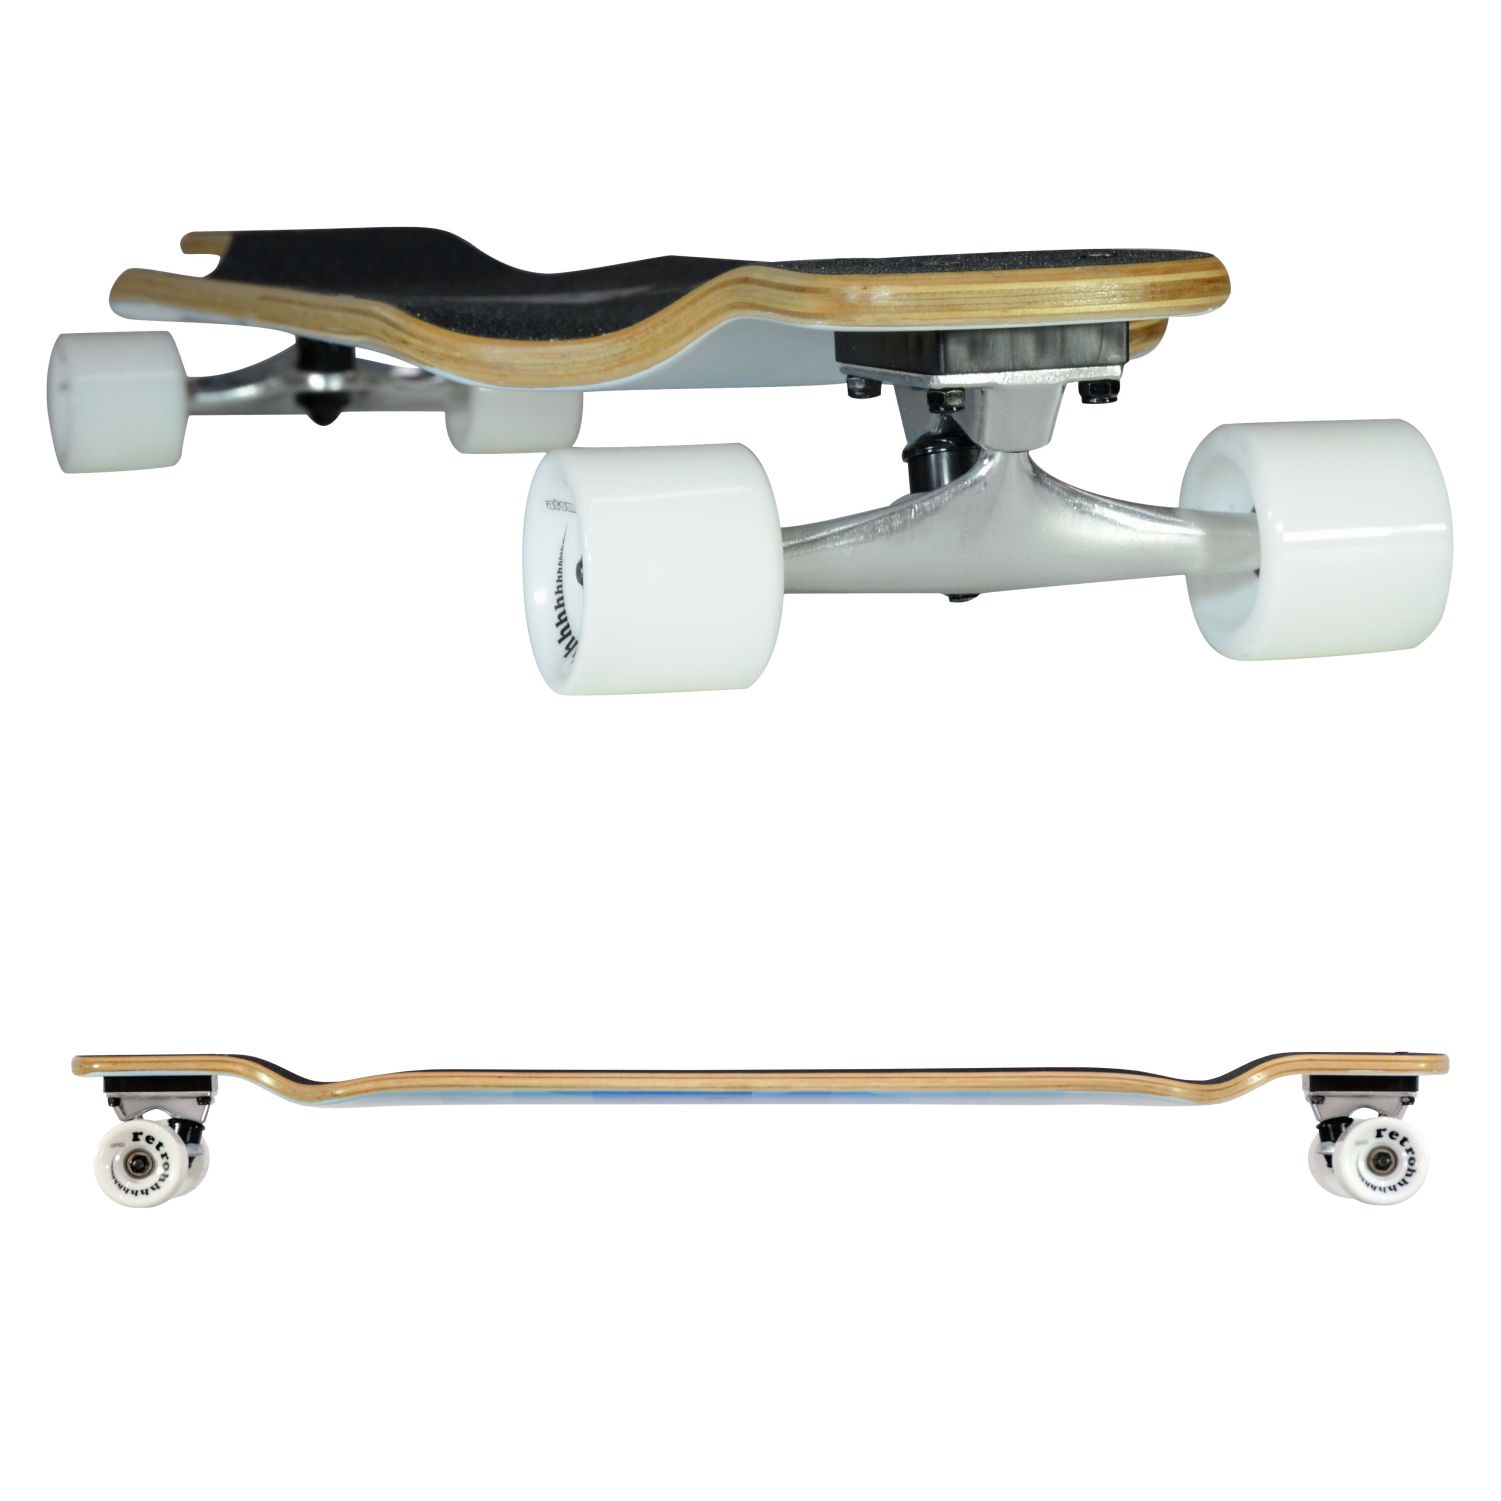 Details about   41 in Complete Skateboard Longboard Drop Through Maple Deck Cruiser Downhill US 